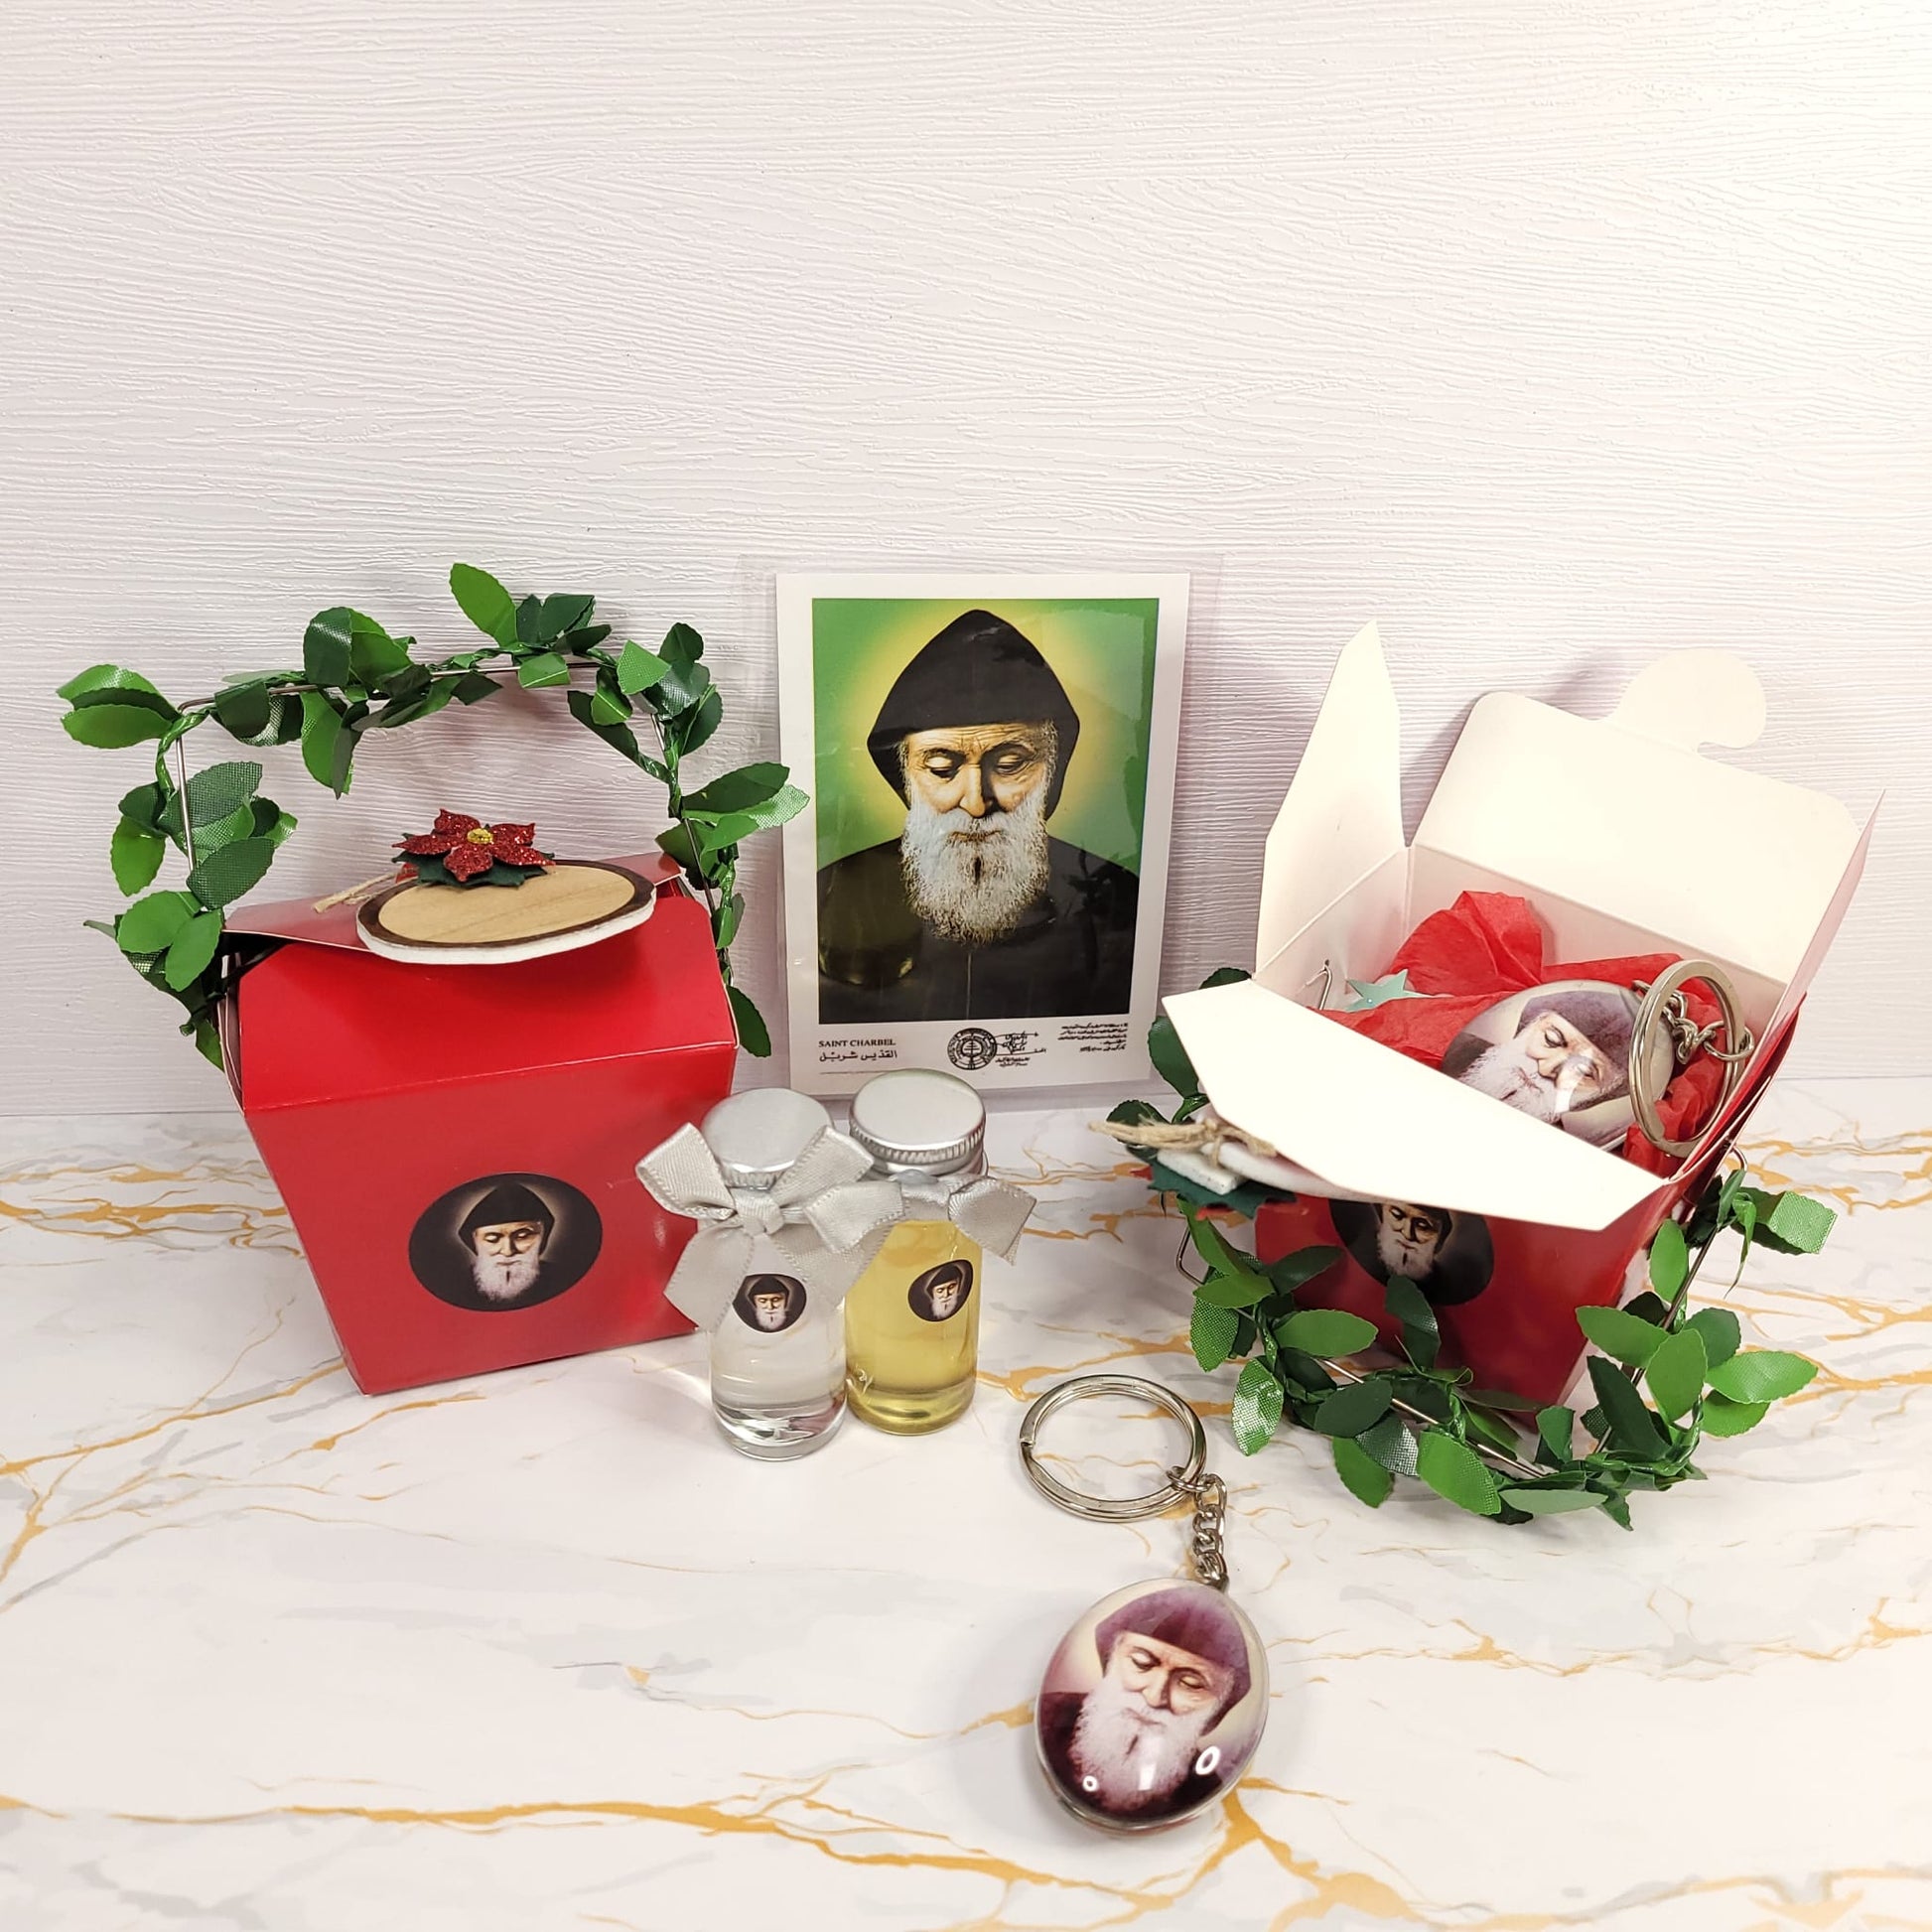 Saint Charbel's mini Christmas basket - Our Lady of Gifts